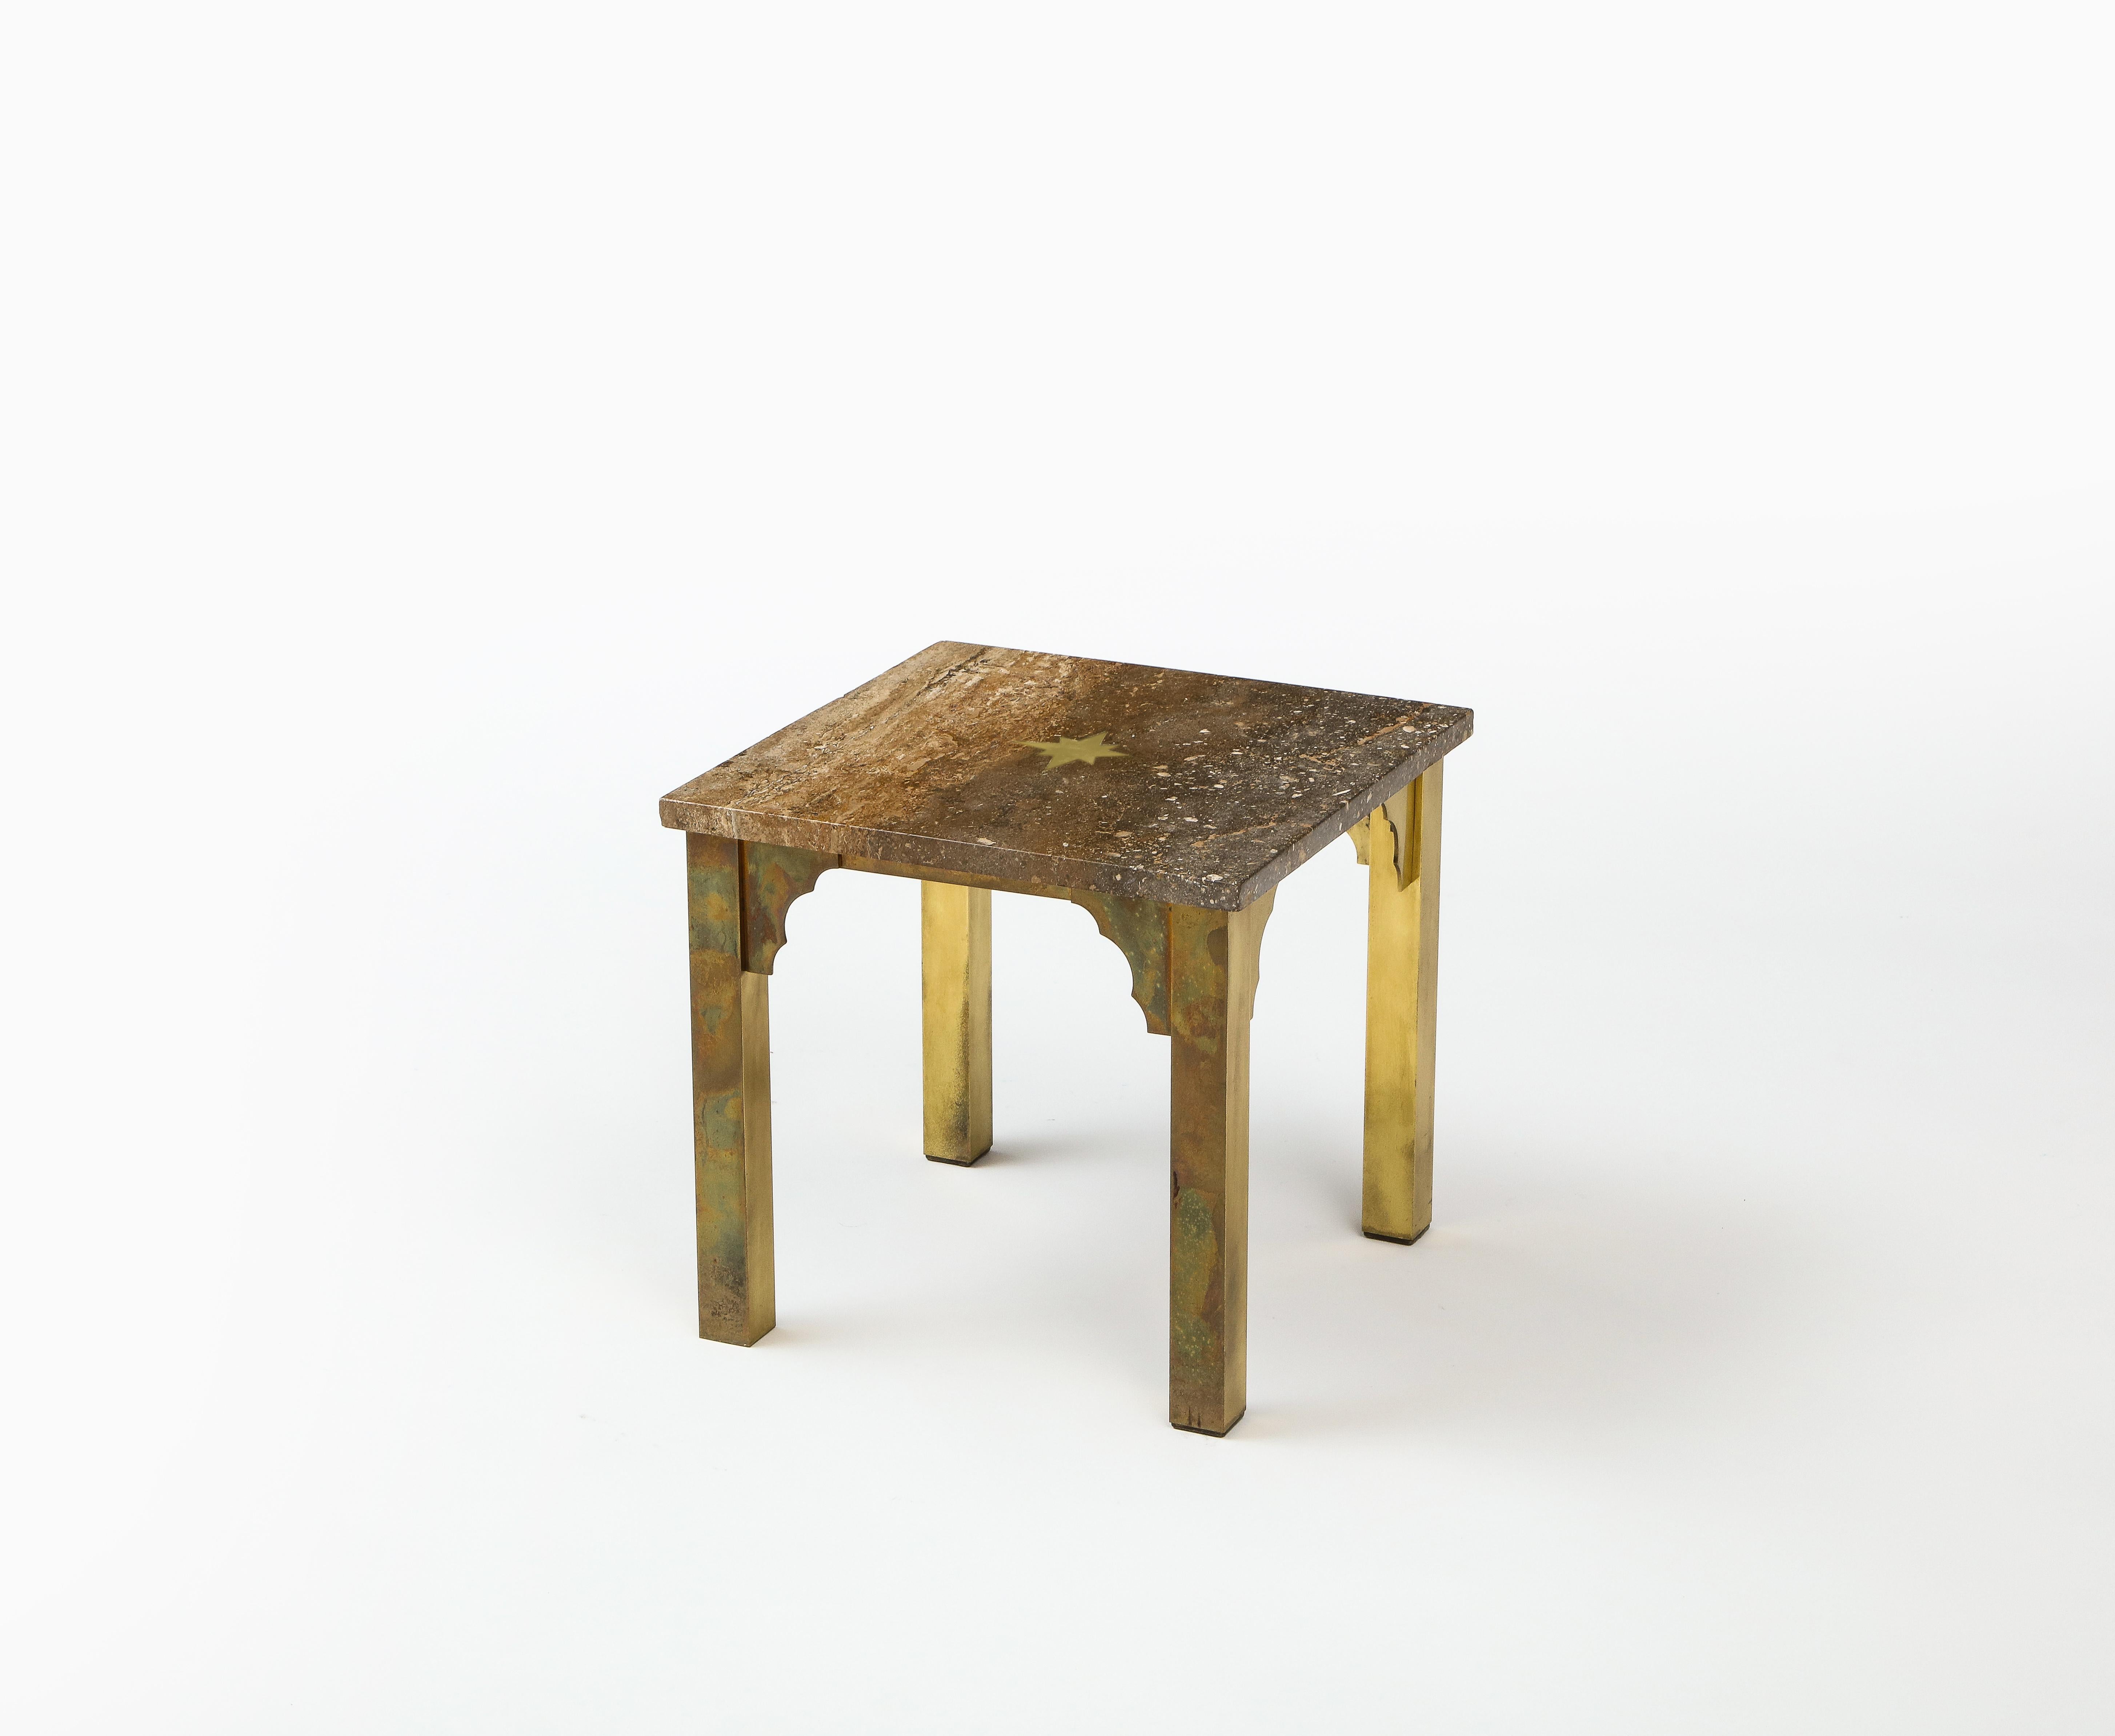 American Small Square Table in Brass & Travertine, Inlay & Arabesque Details, USA 1960's For Sale